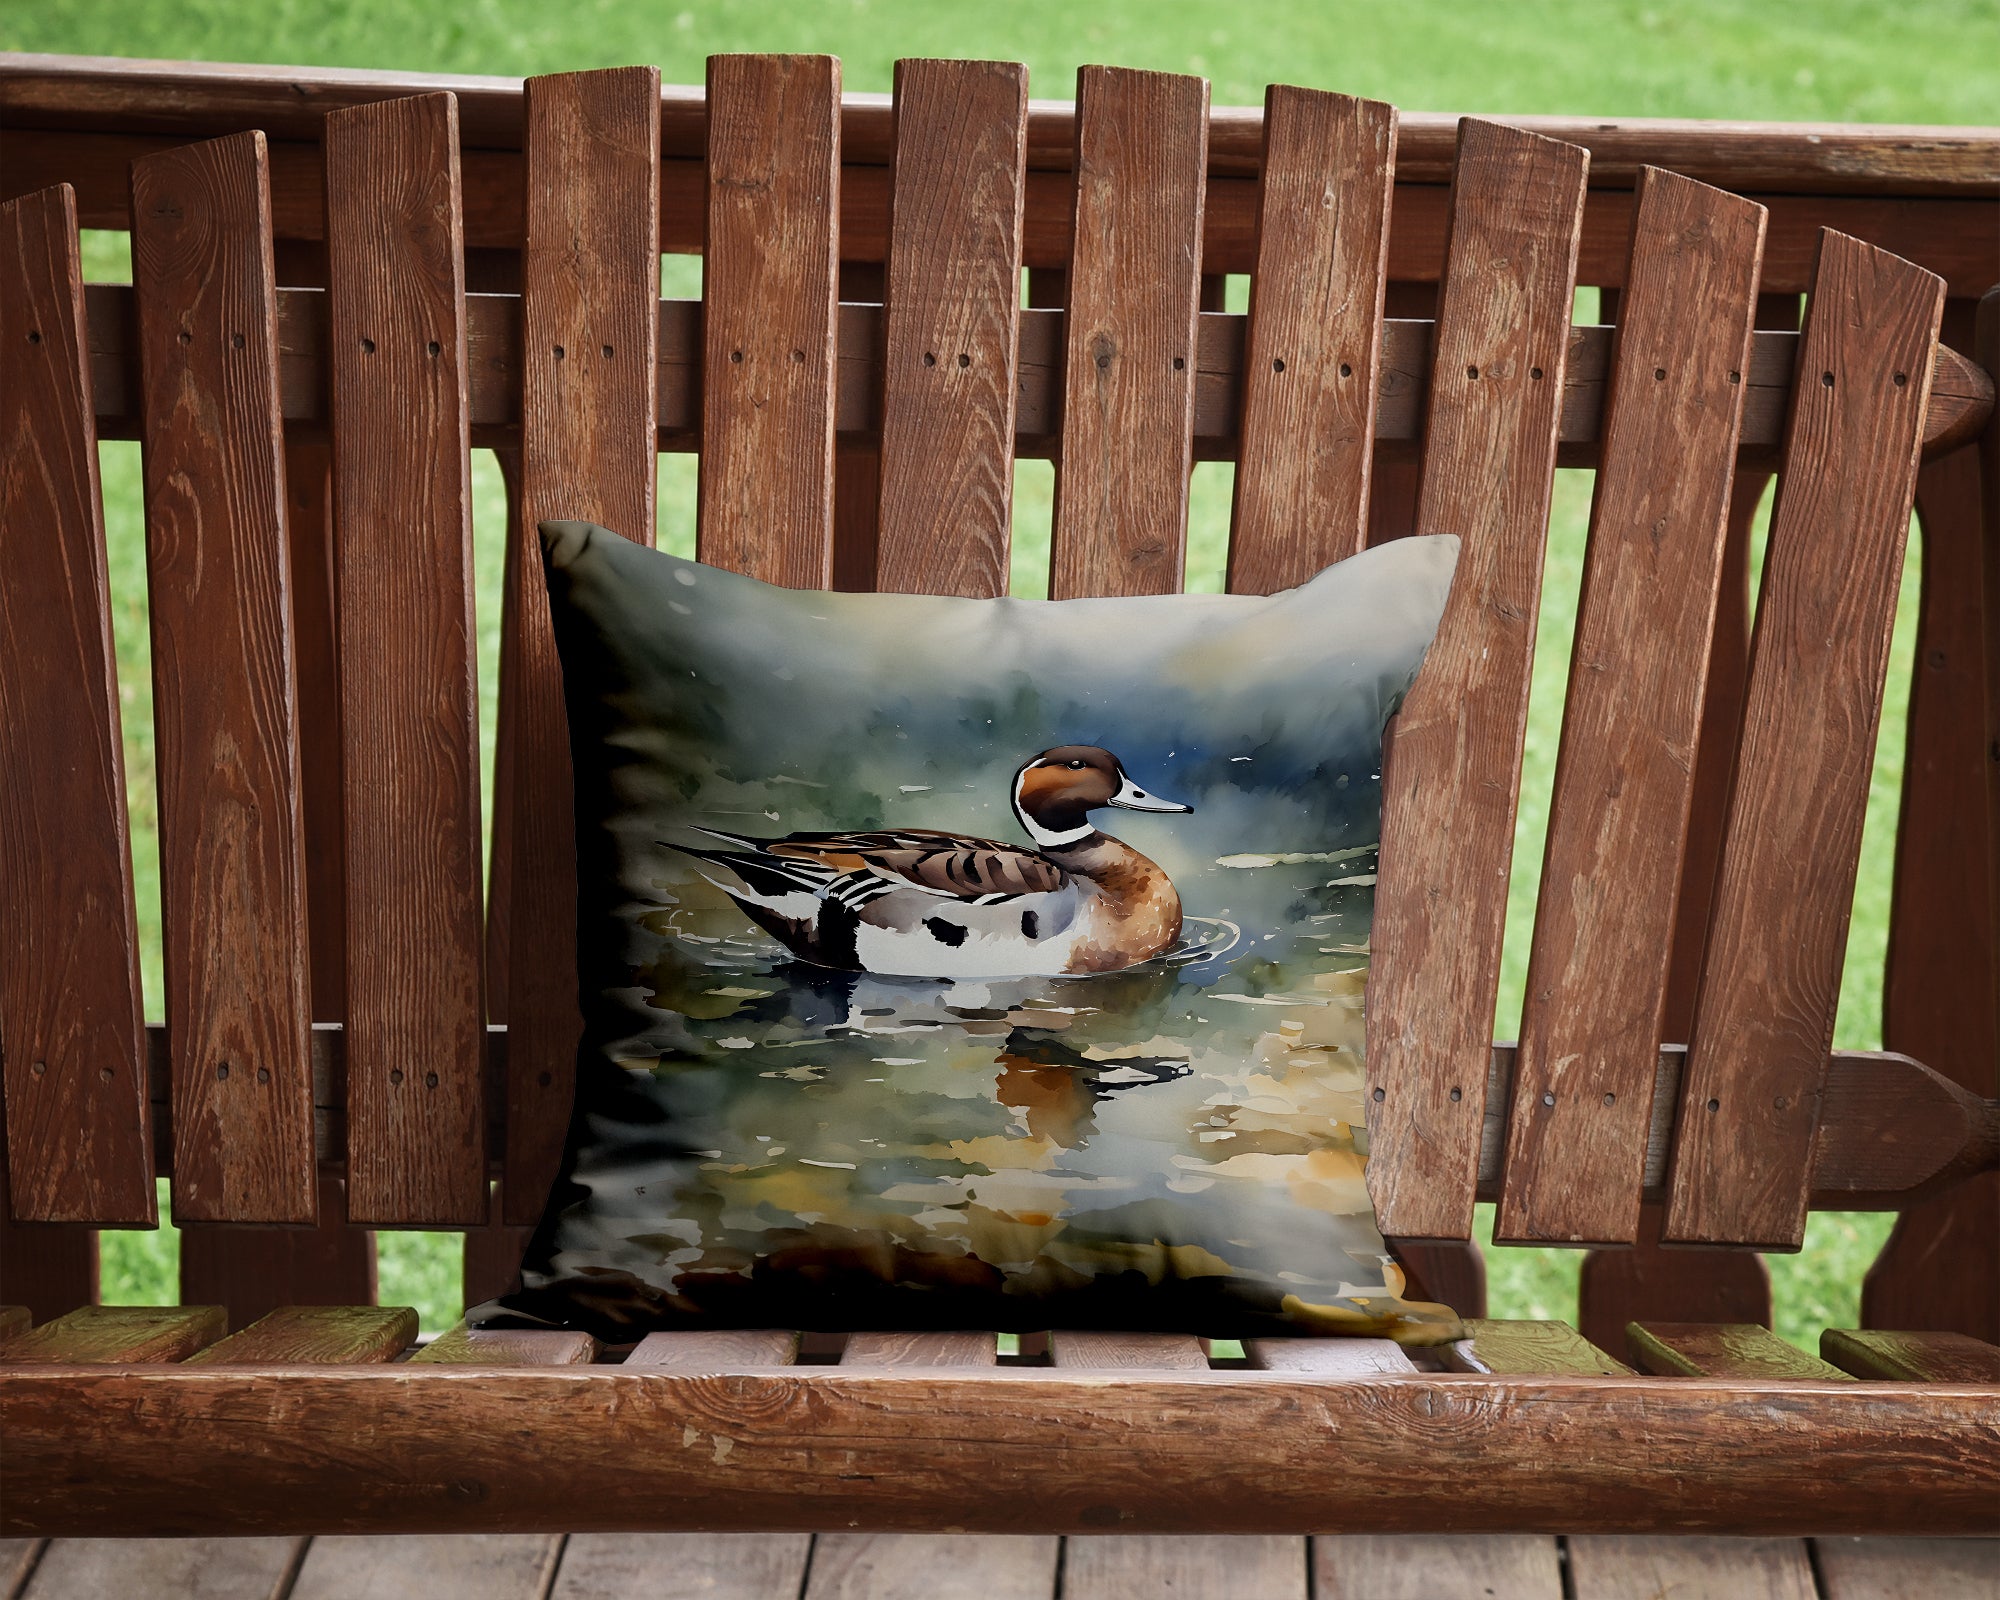 Buy this Northern Pintail Throw Pillow